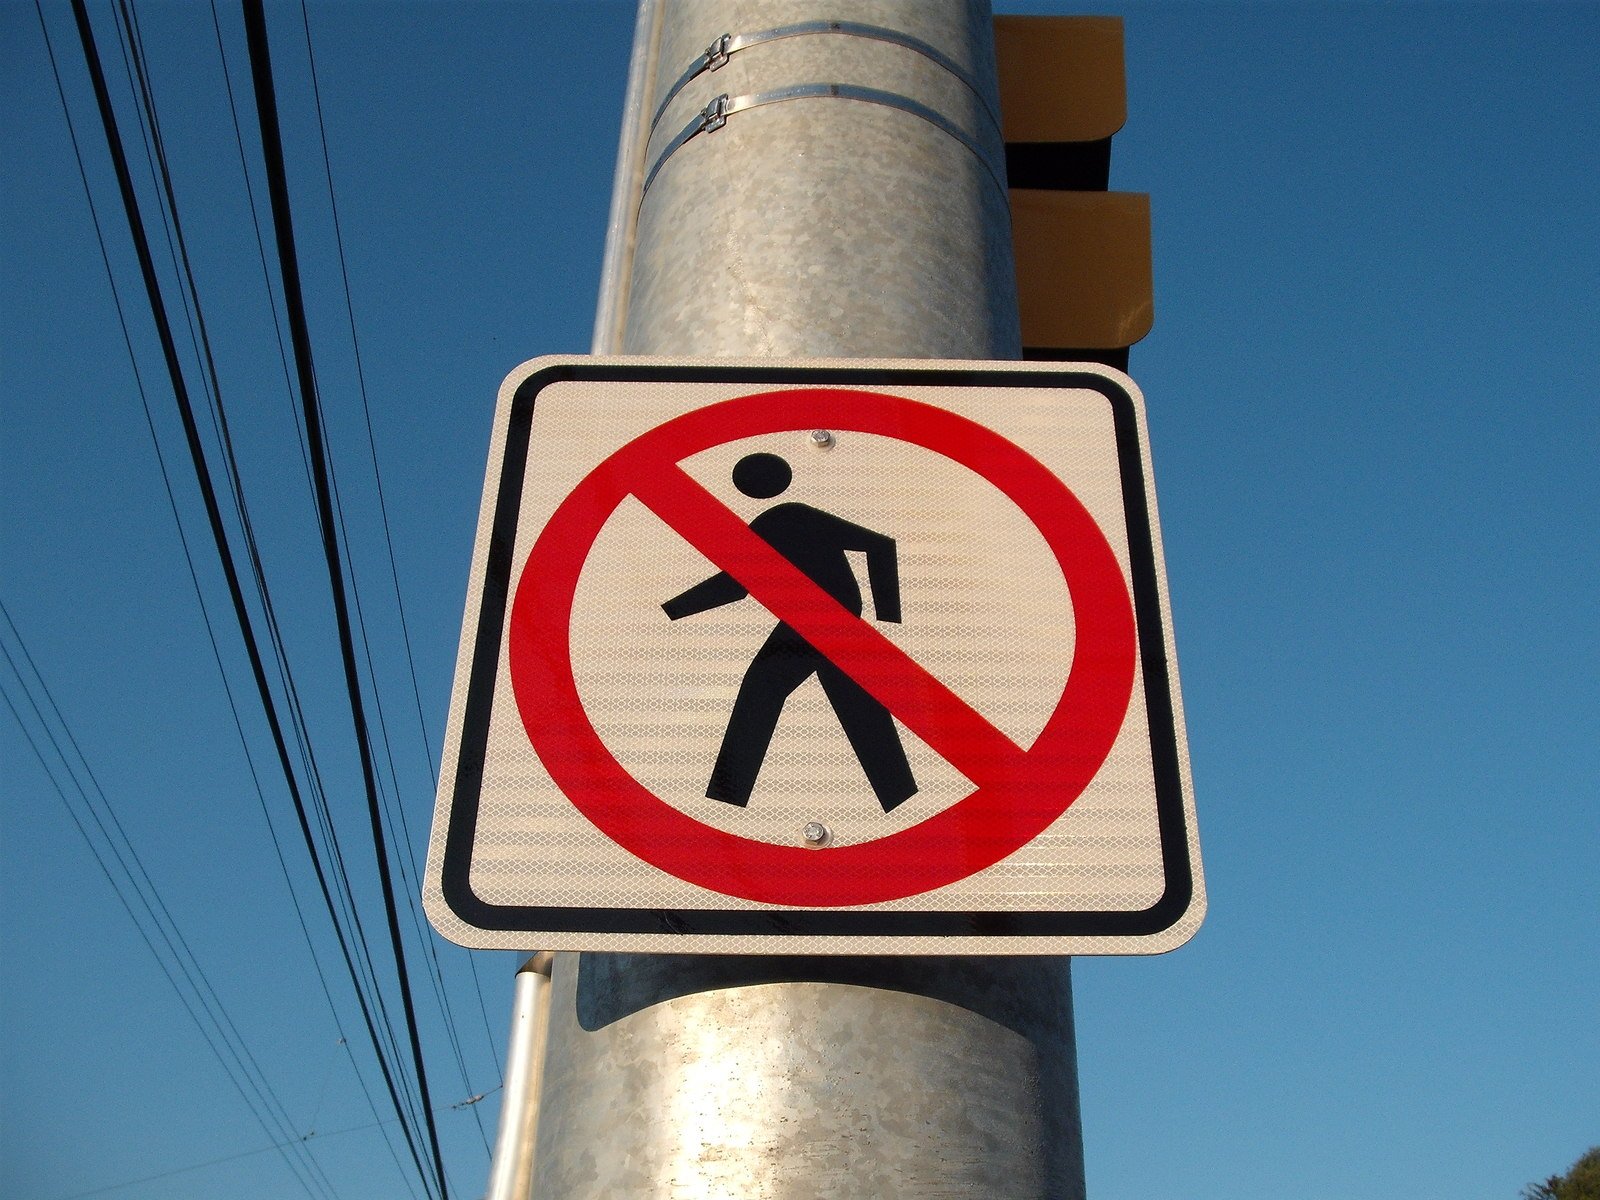 a sign is on a street pole with wires overhead